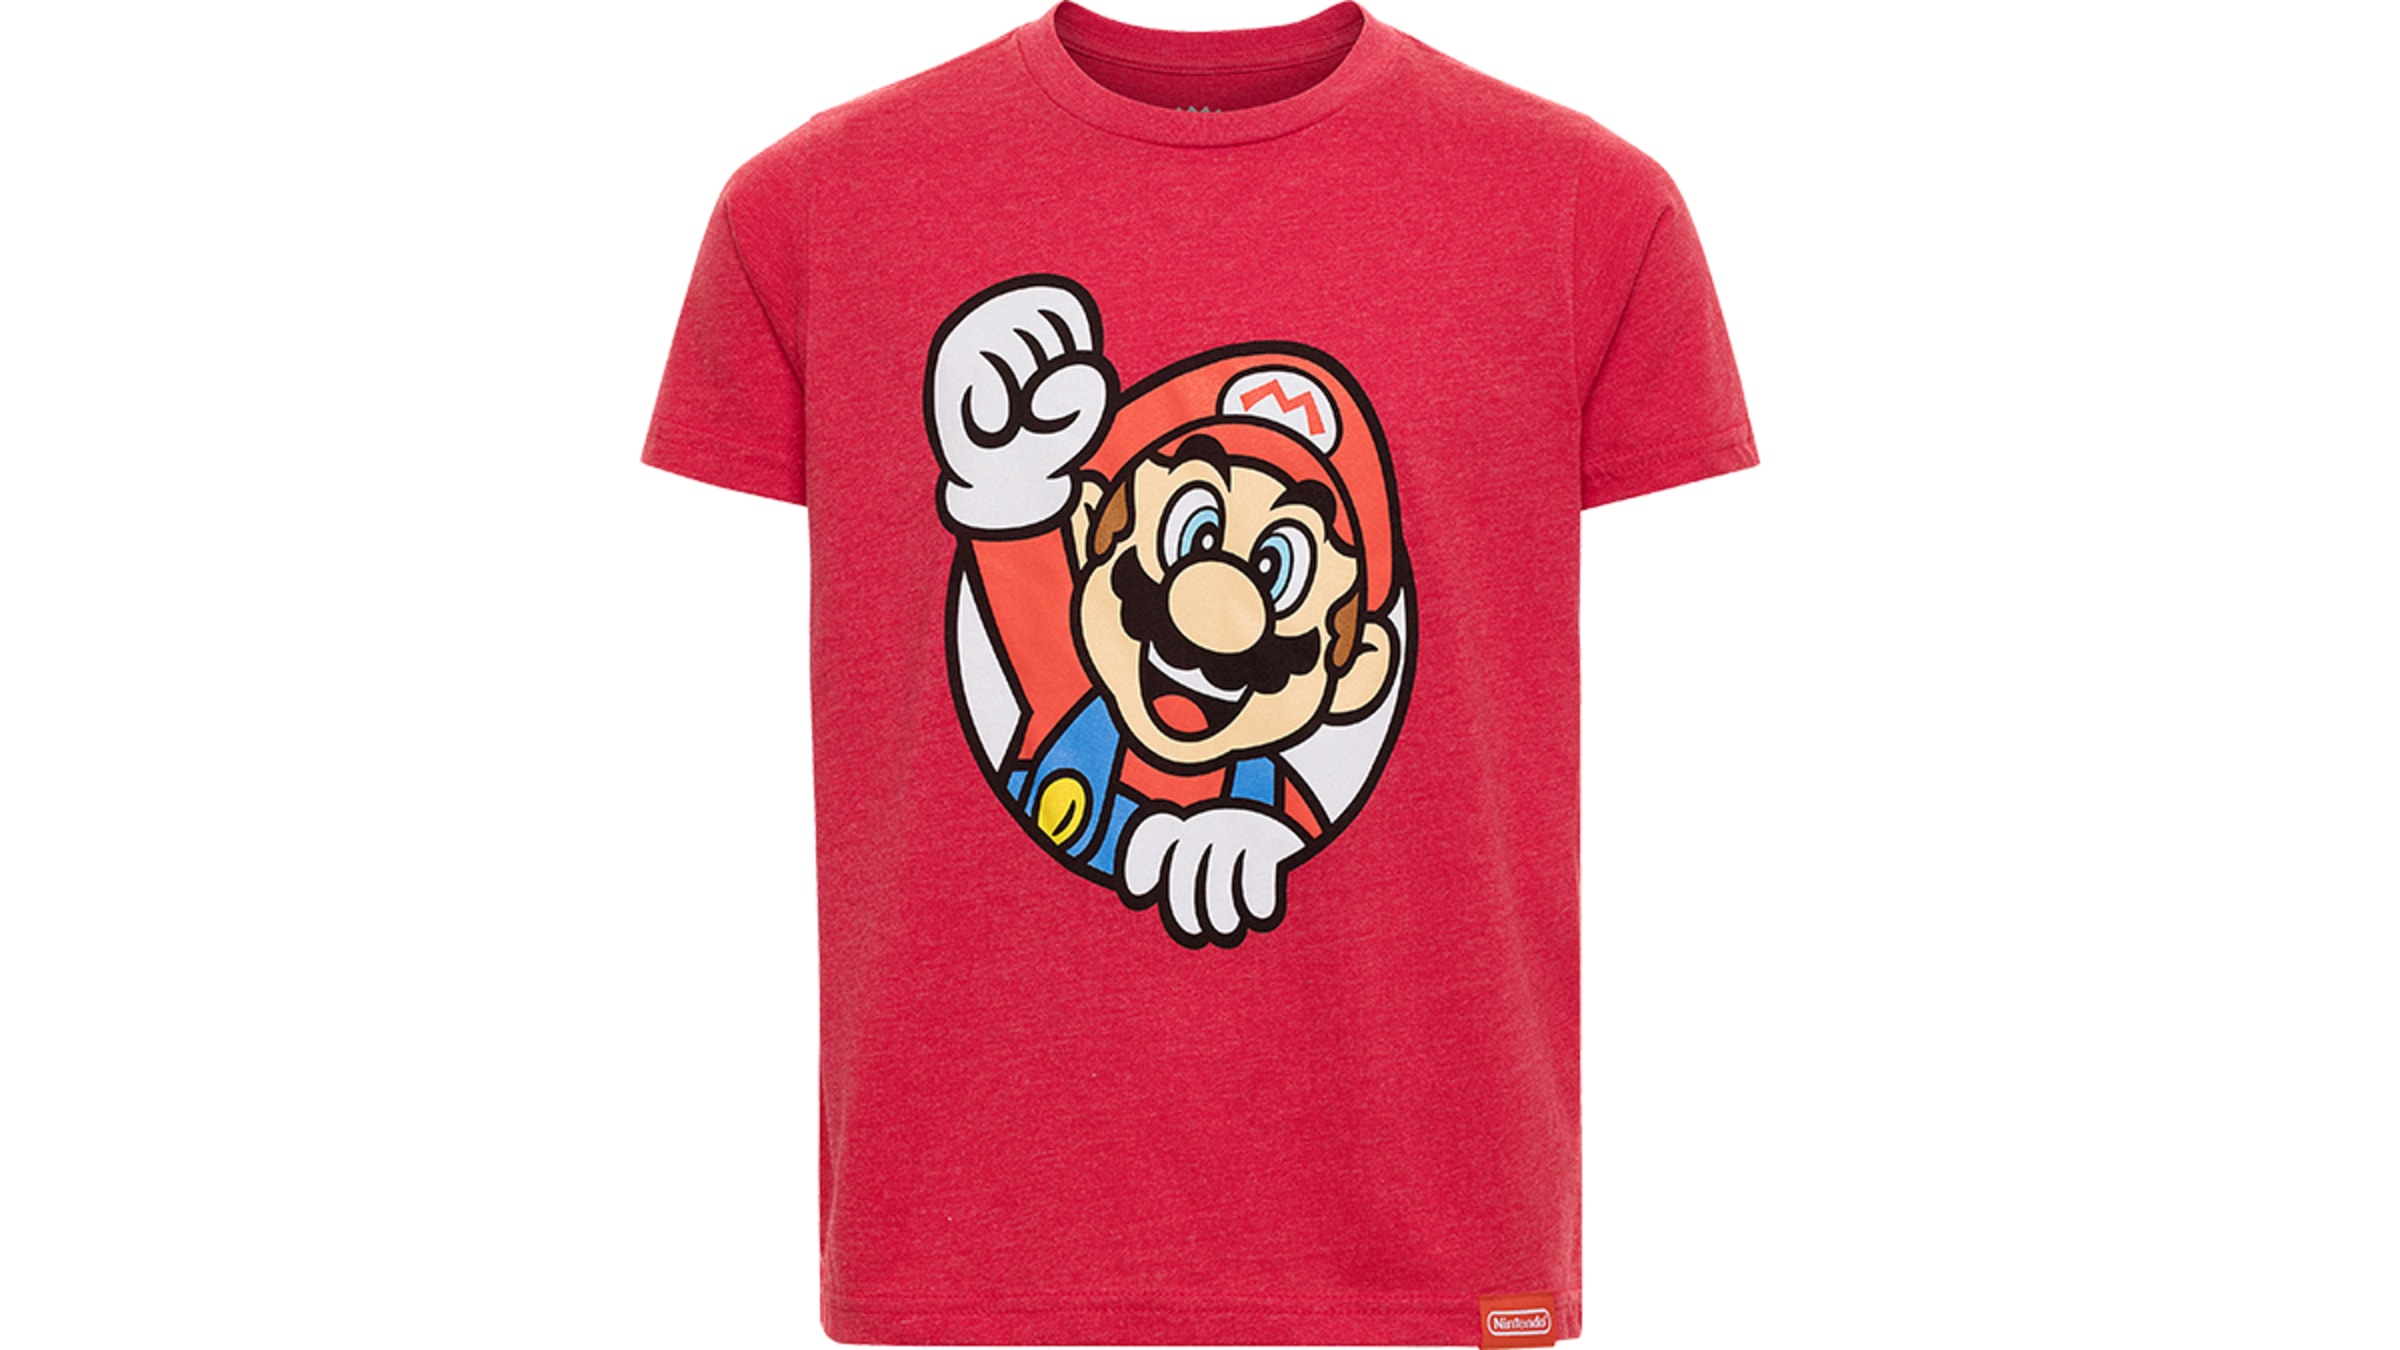 lawaai musicus basketbal Here We Go, Mario - Youth Comfy T-Shirt - XS - Nintendo Official Site